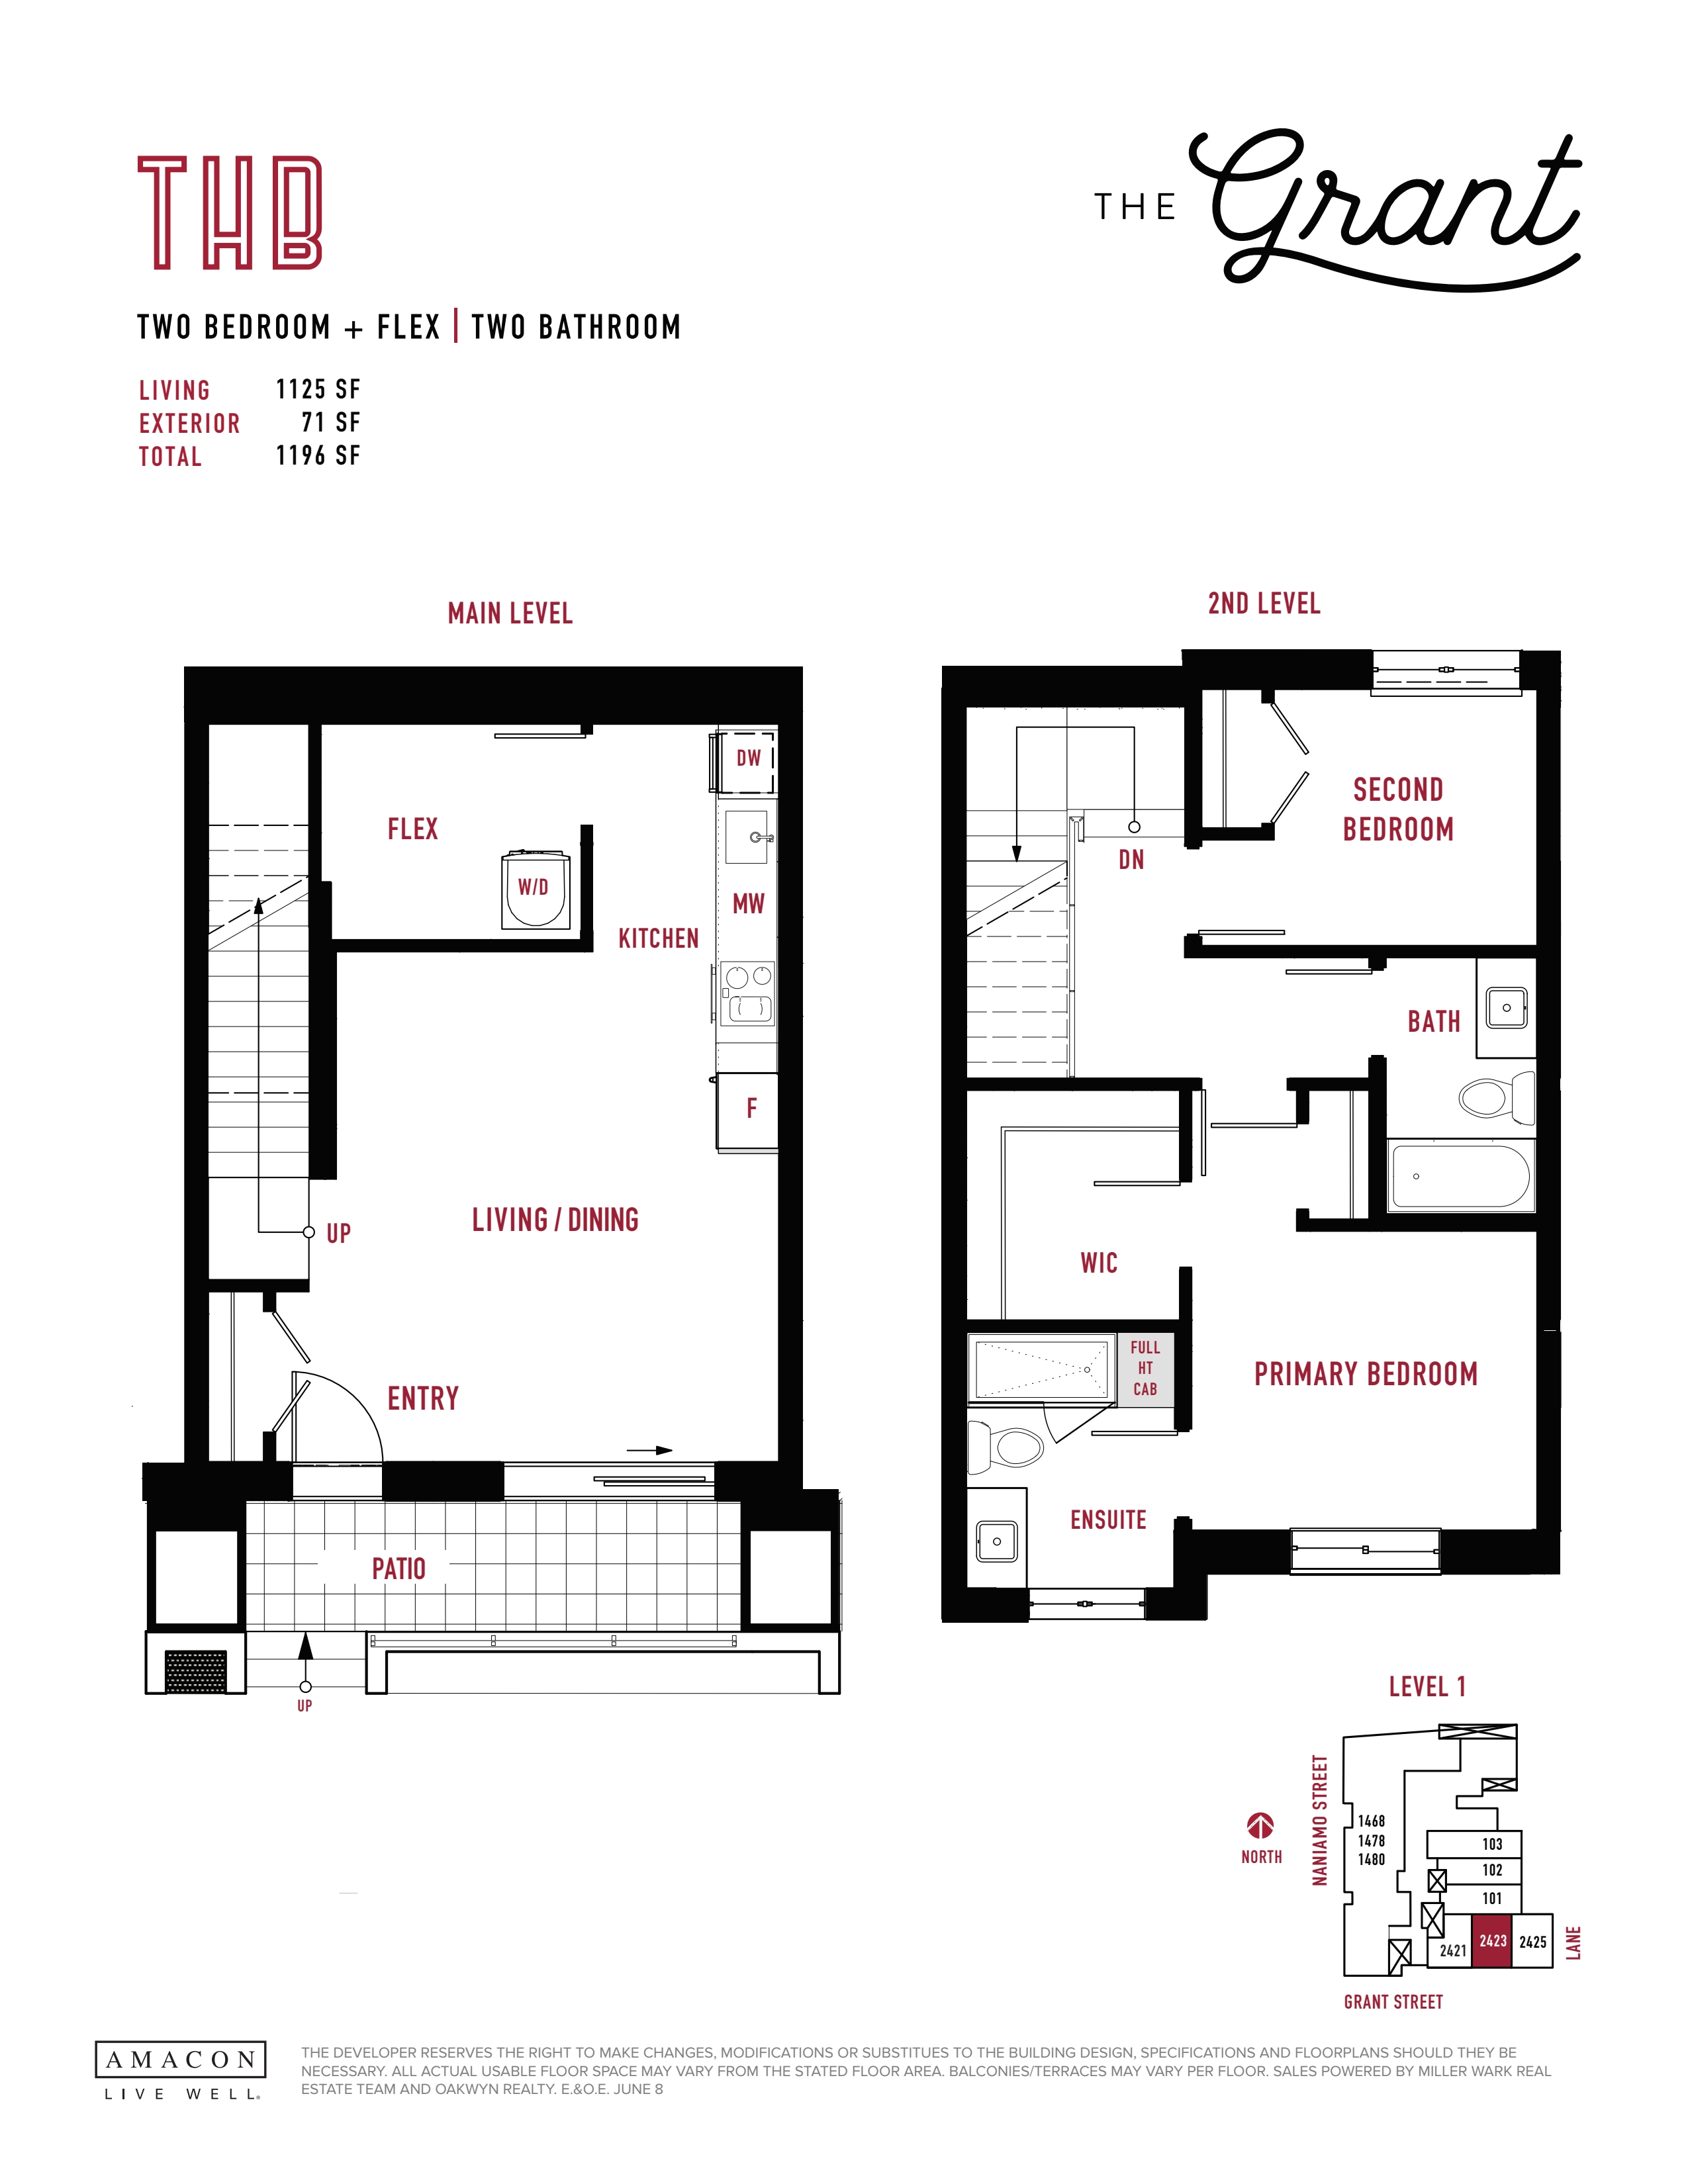 THB Floor Plan of The Grant Condos with undefined beds